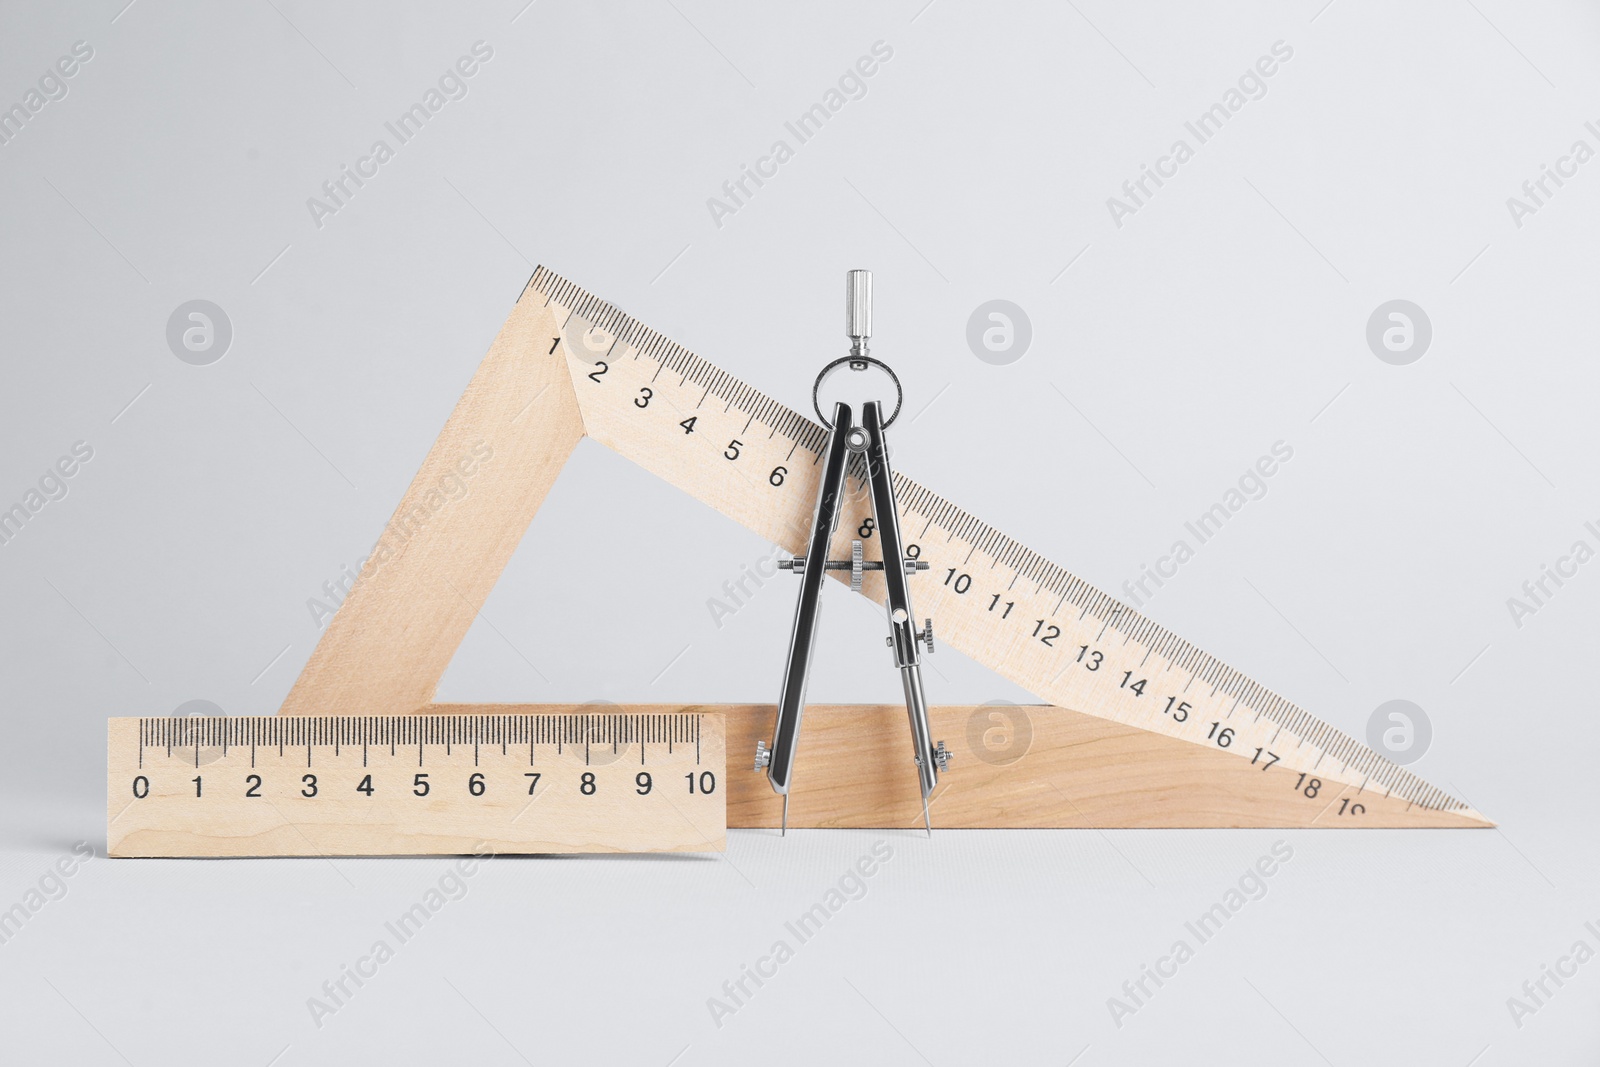 Photo of Ruler with measuring length markings, triangle and compass on white background